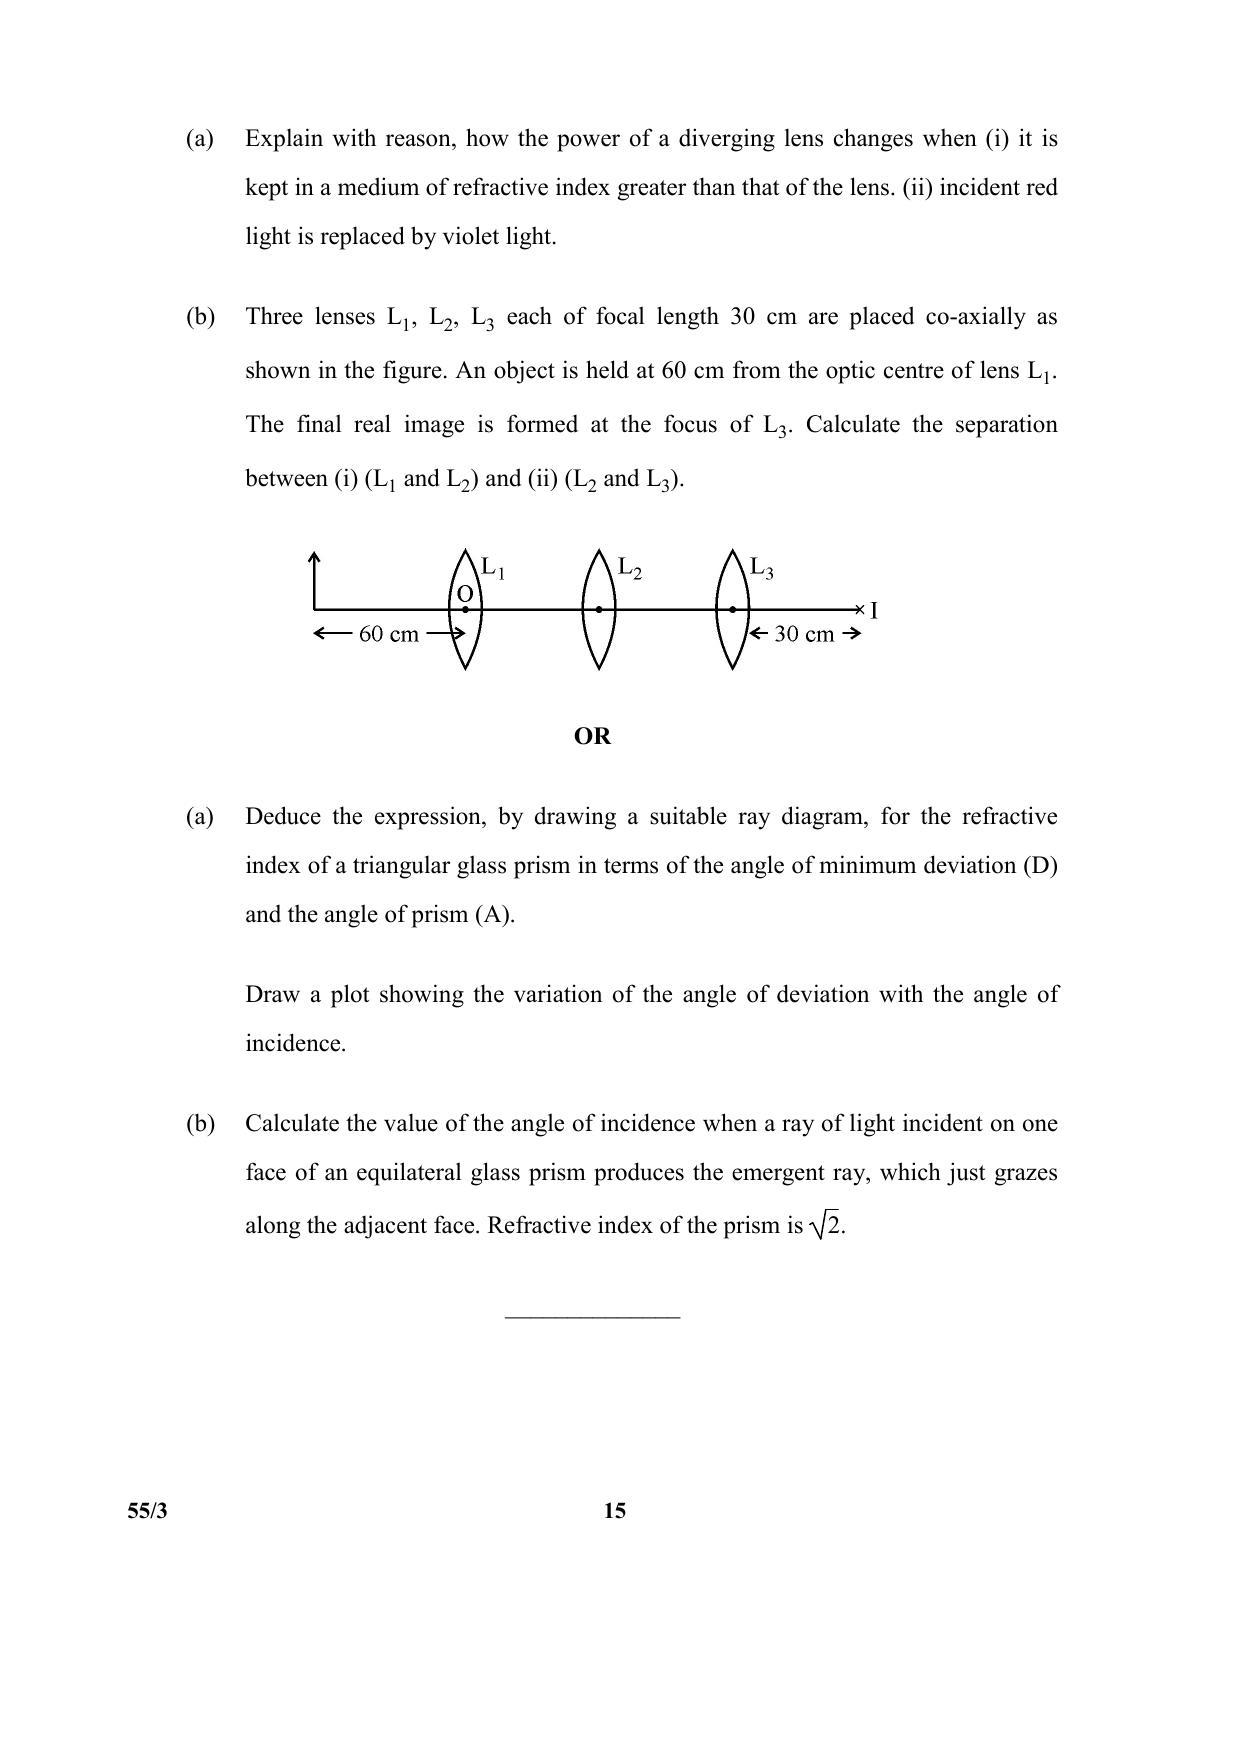 CBSE Class 12 55-3 (Physics) 2017-comptt Question Paper - Page 15